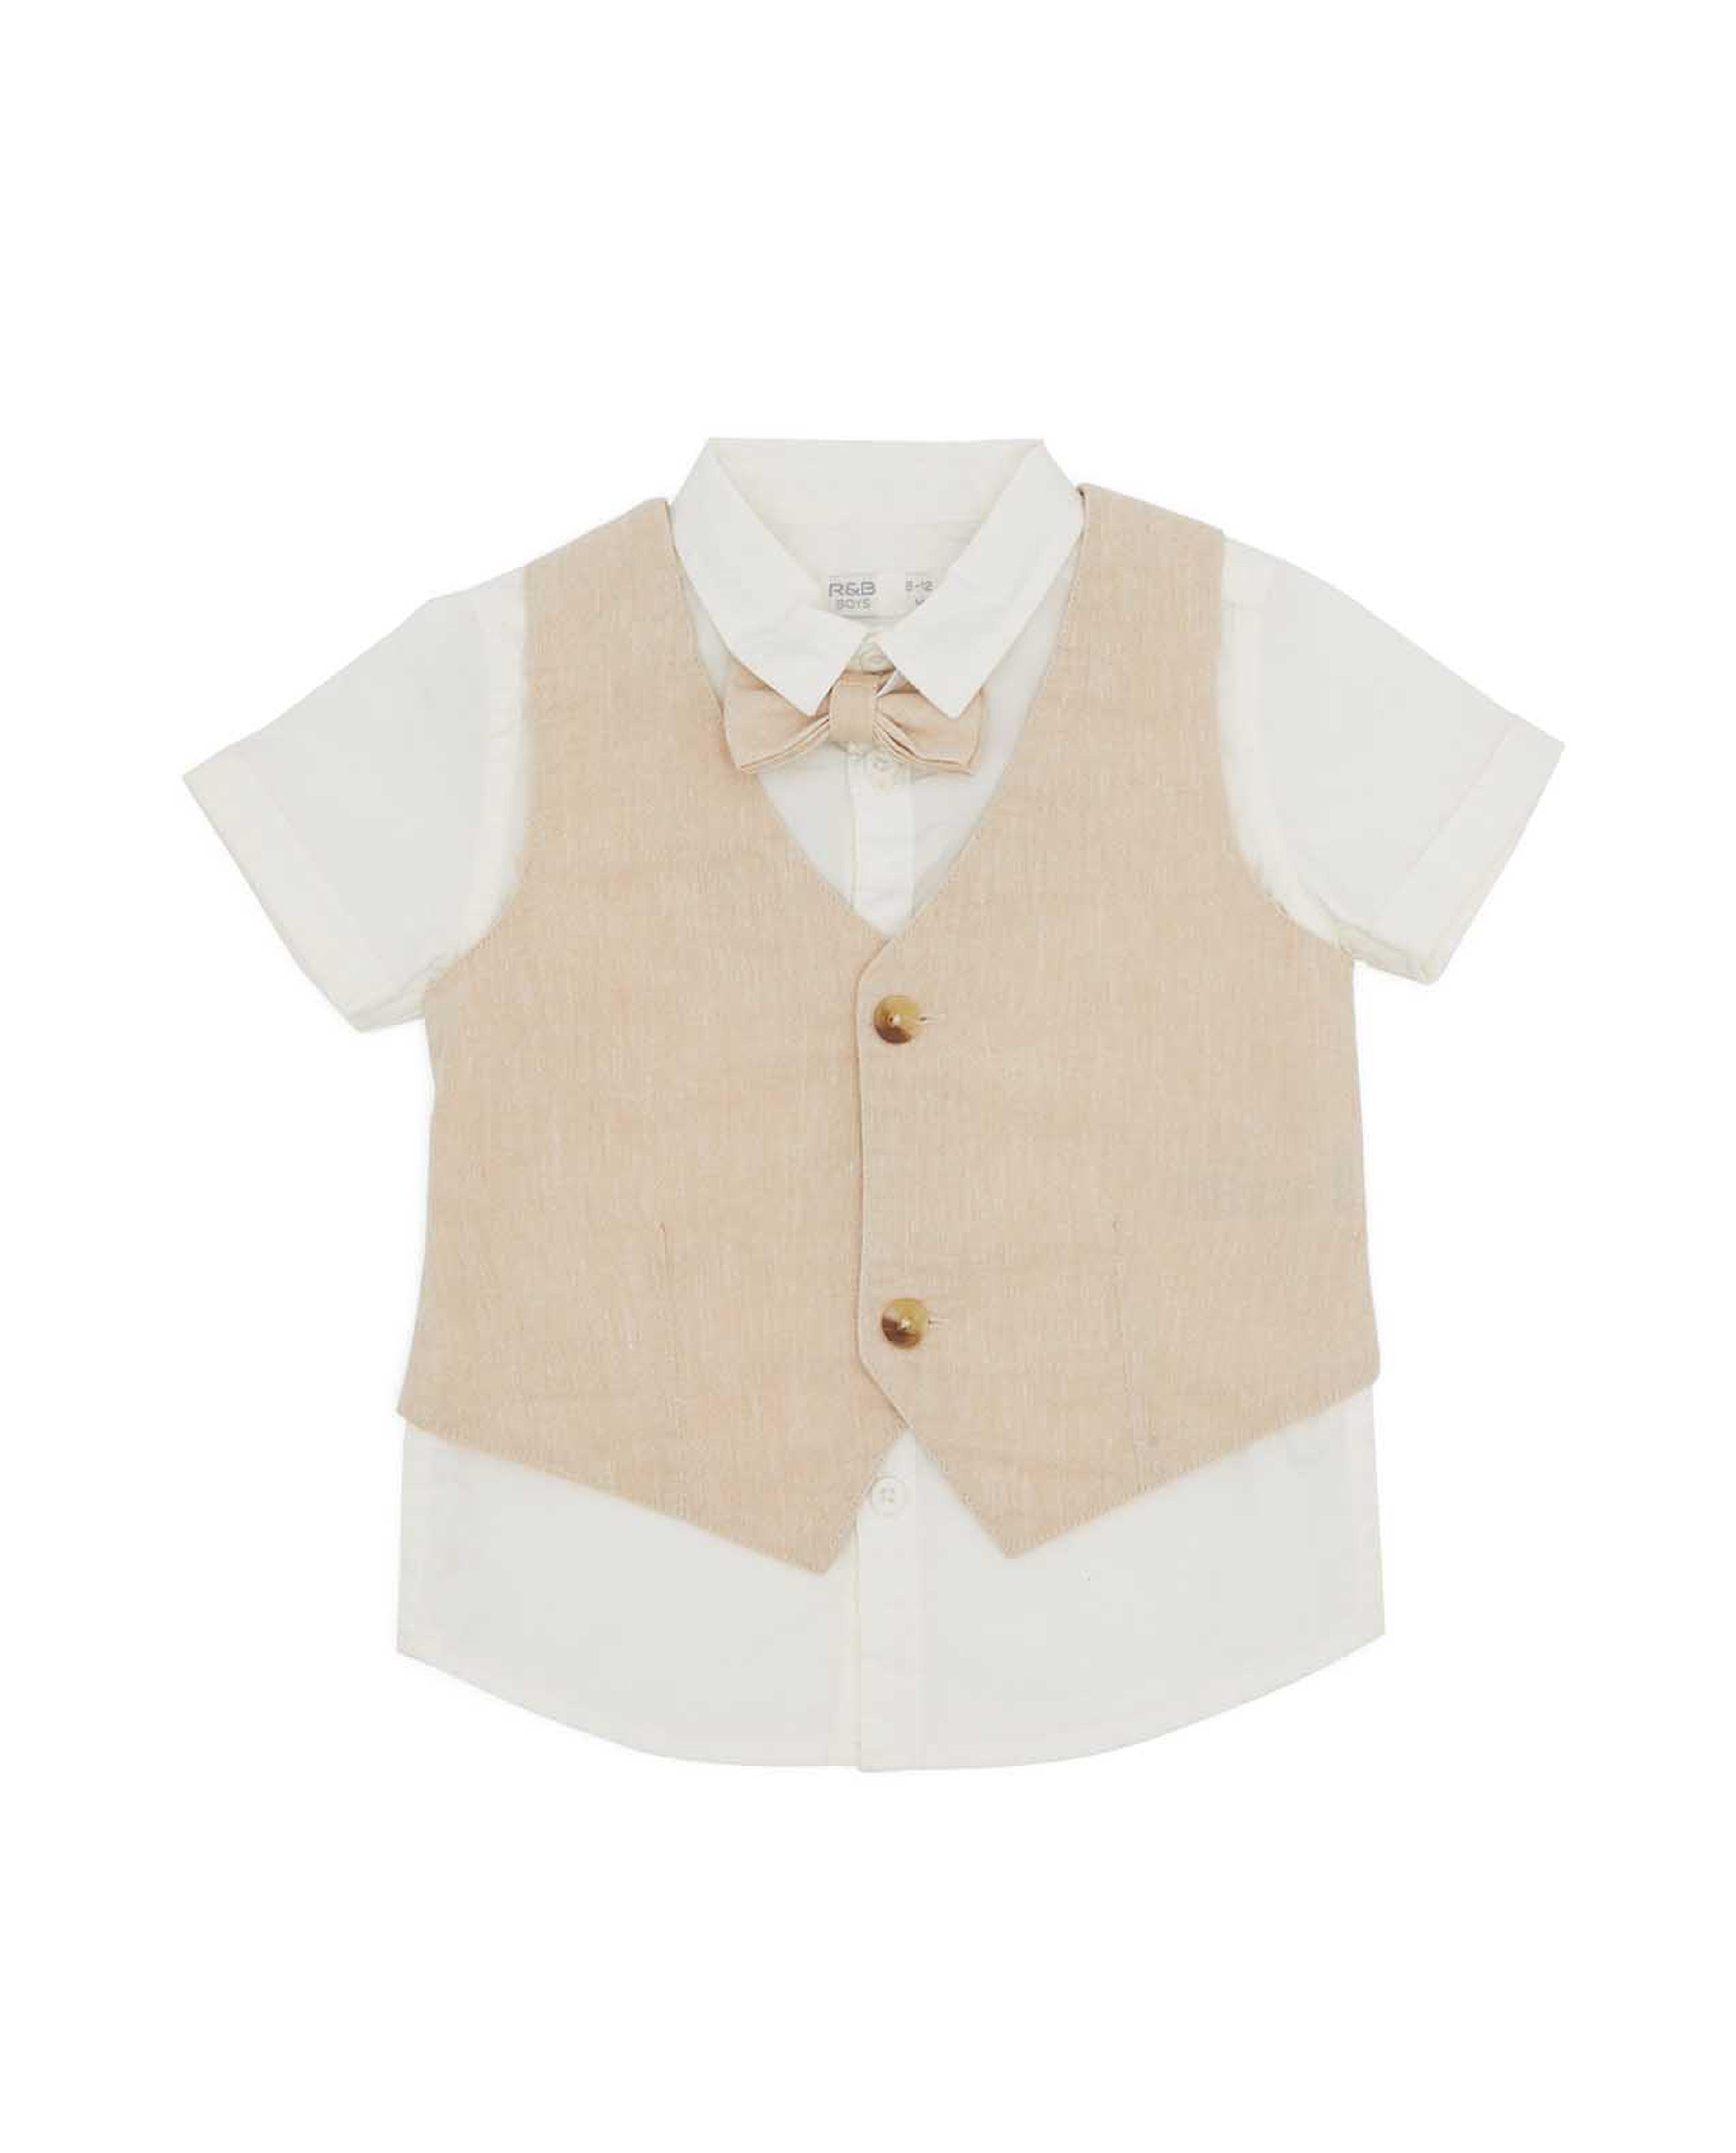 3 Piece Solid Clothing Set with Bow-Tie